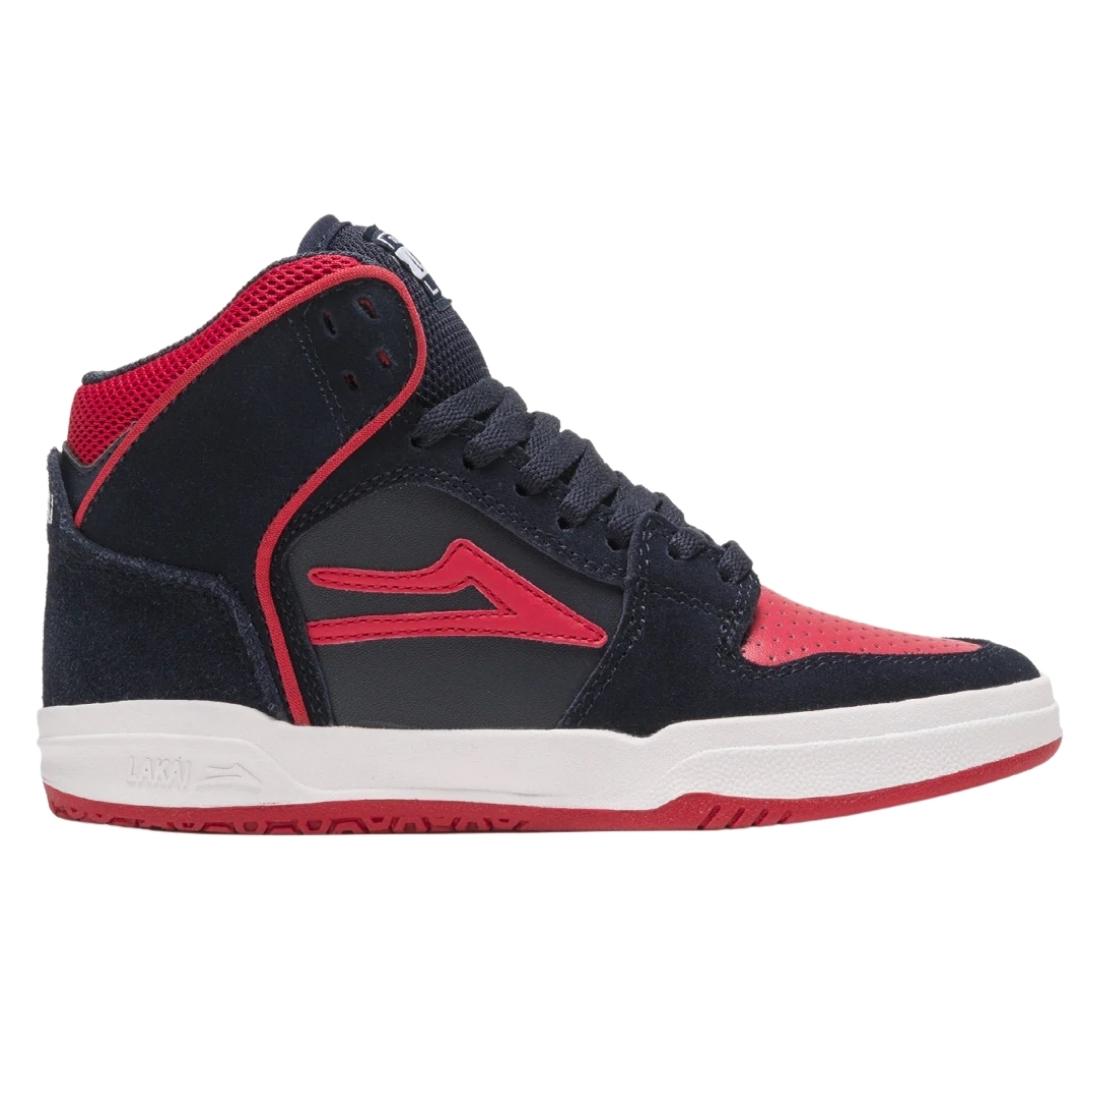 Lakai Telford Kids Skate Shoes - Navy/Red Suede - Boys High Top Trainers by Lakai